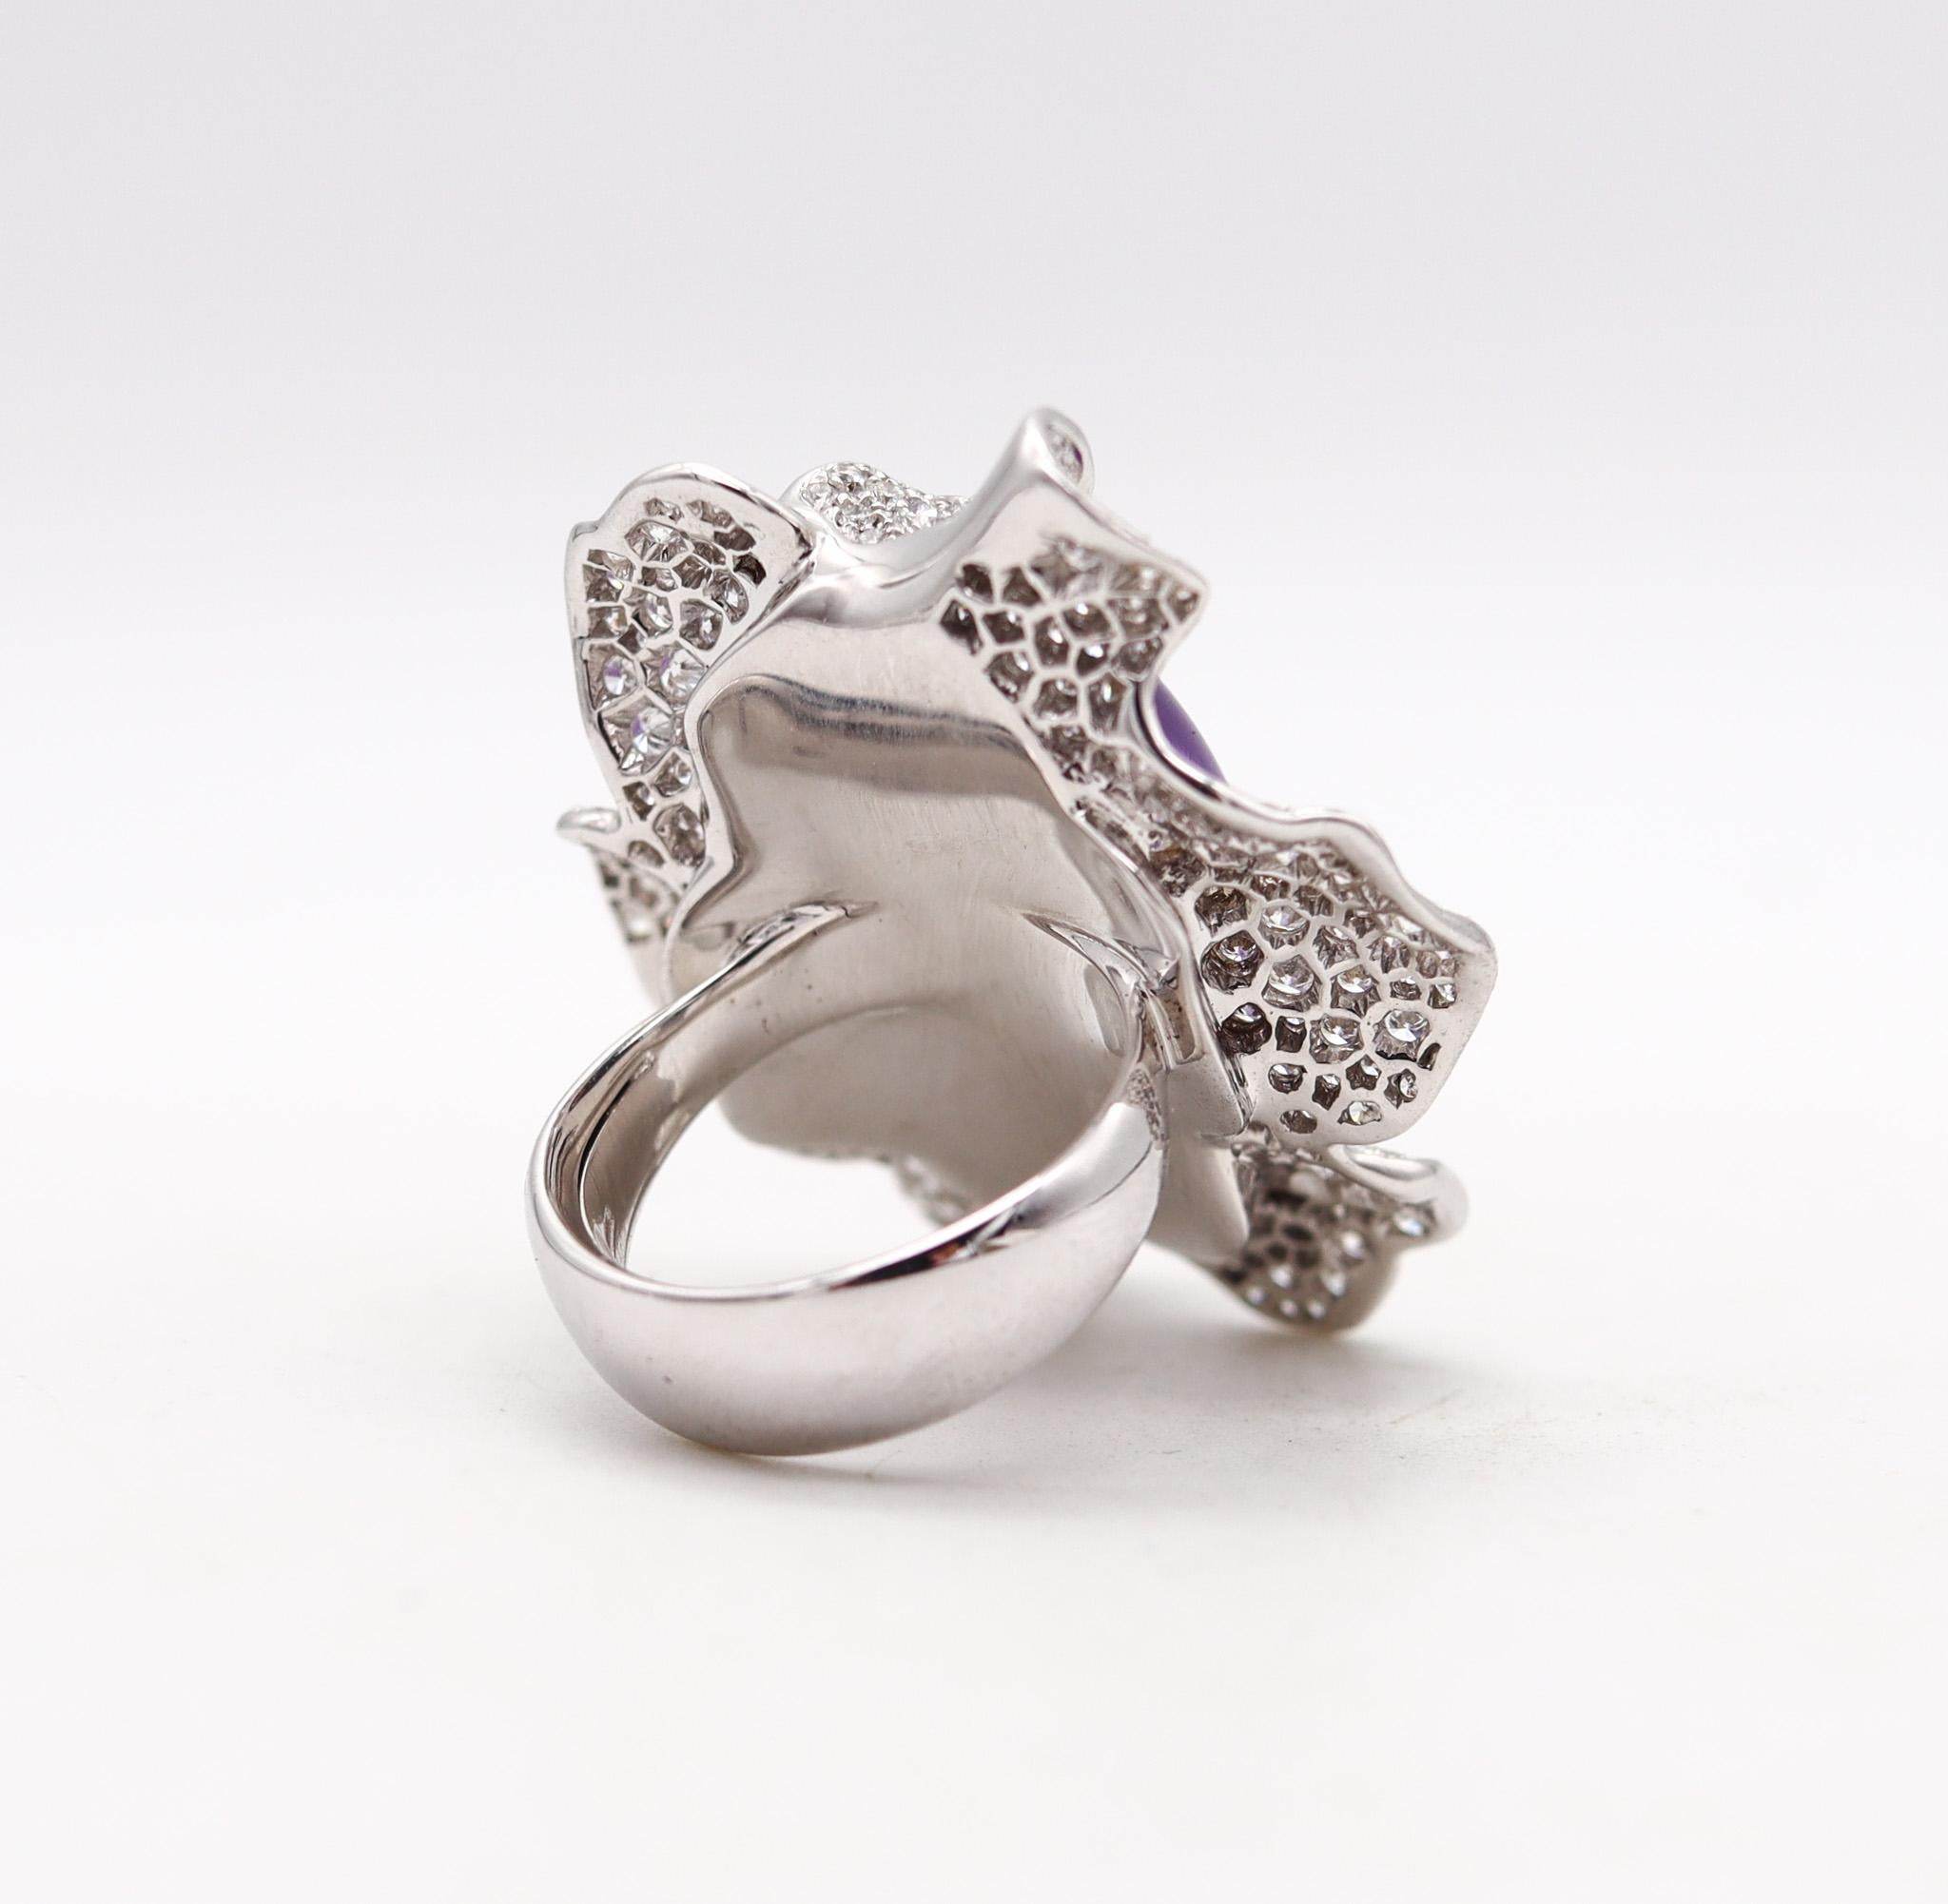 Modern Palmiero Milano Cocktail Ring In 18Kt White Gold 33.09 Ctw Diamonds And Amethyst